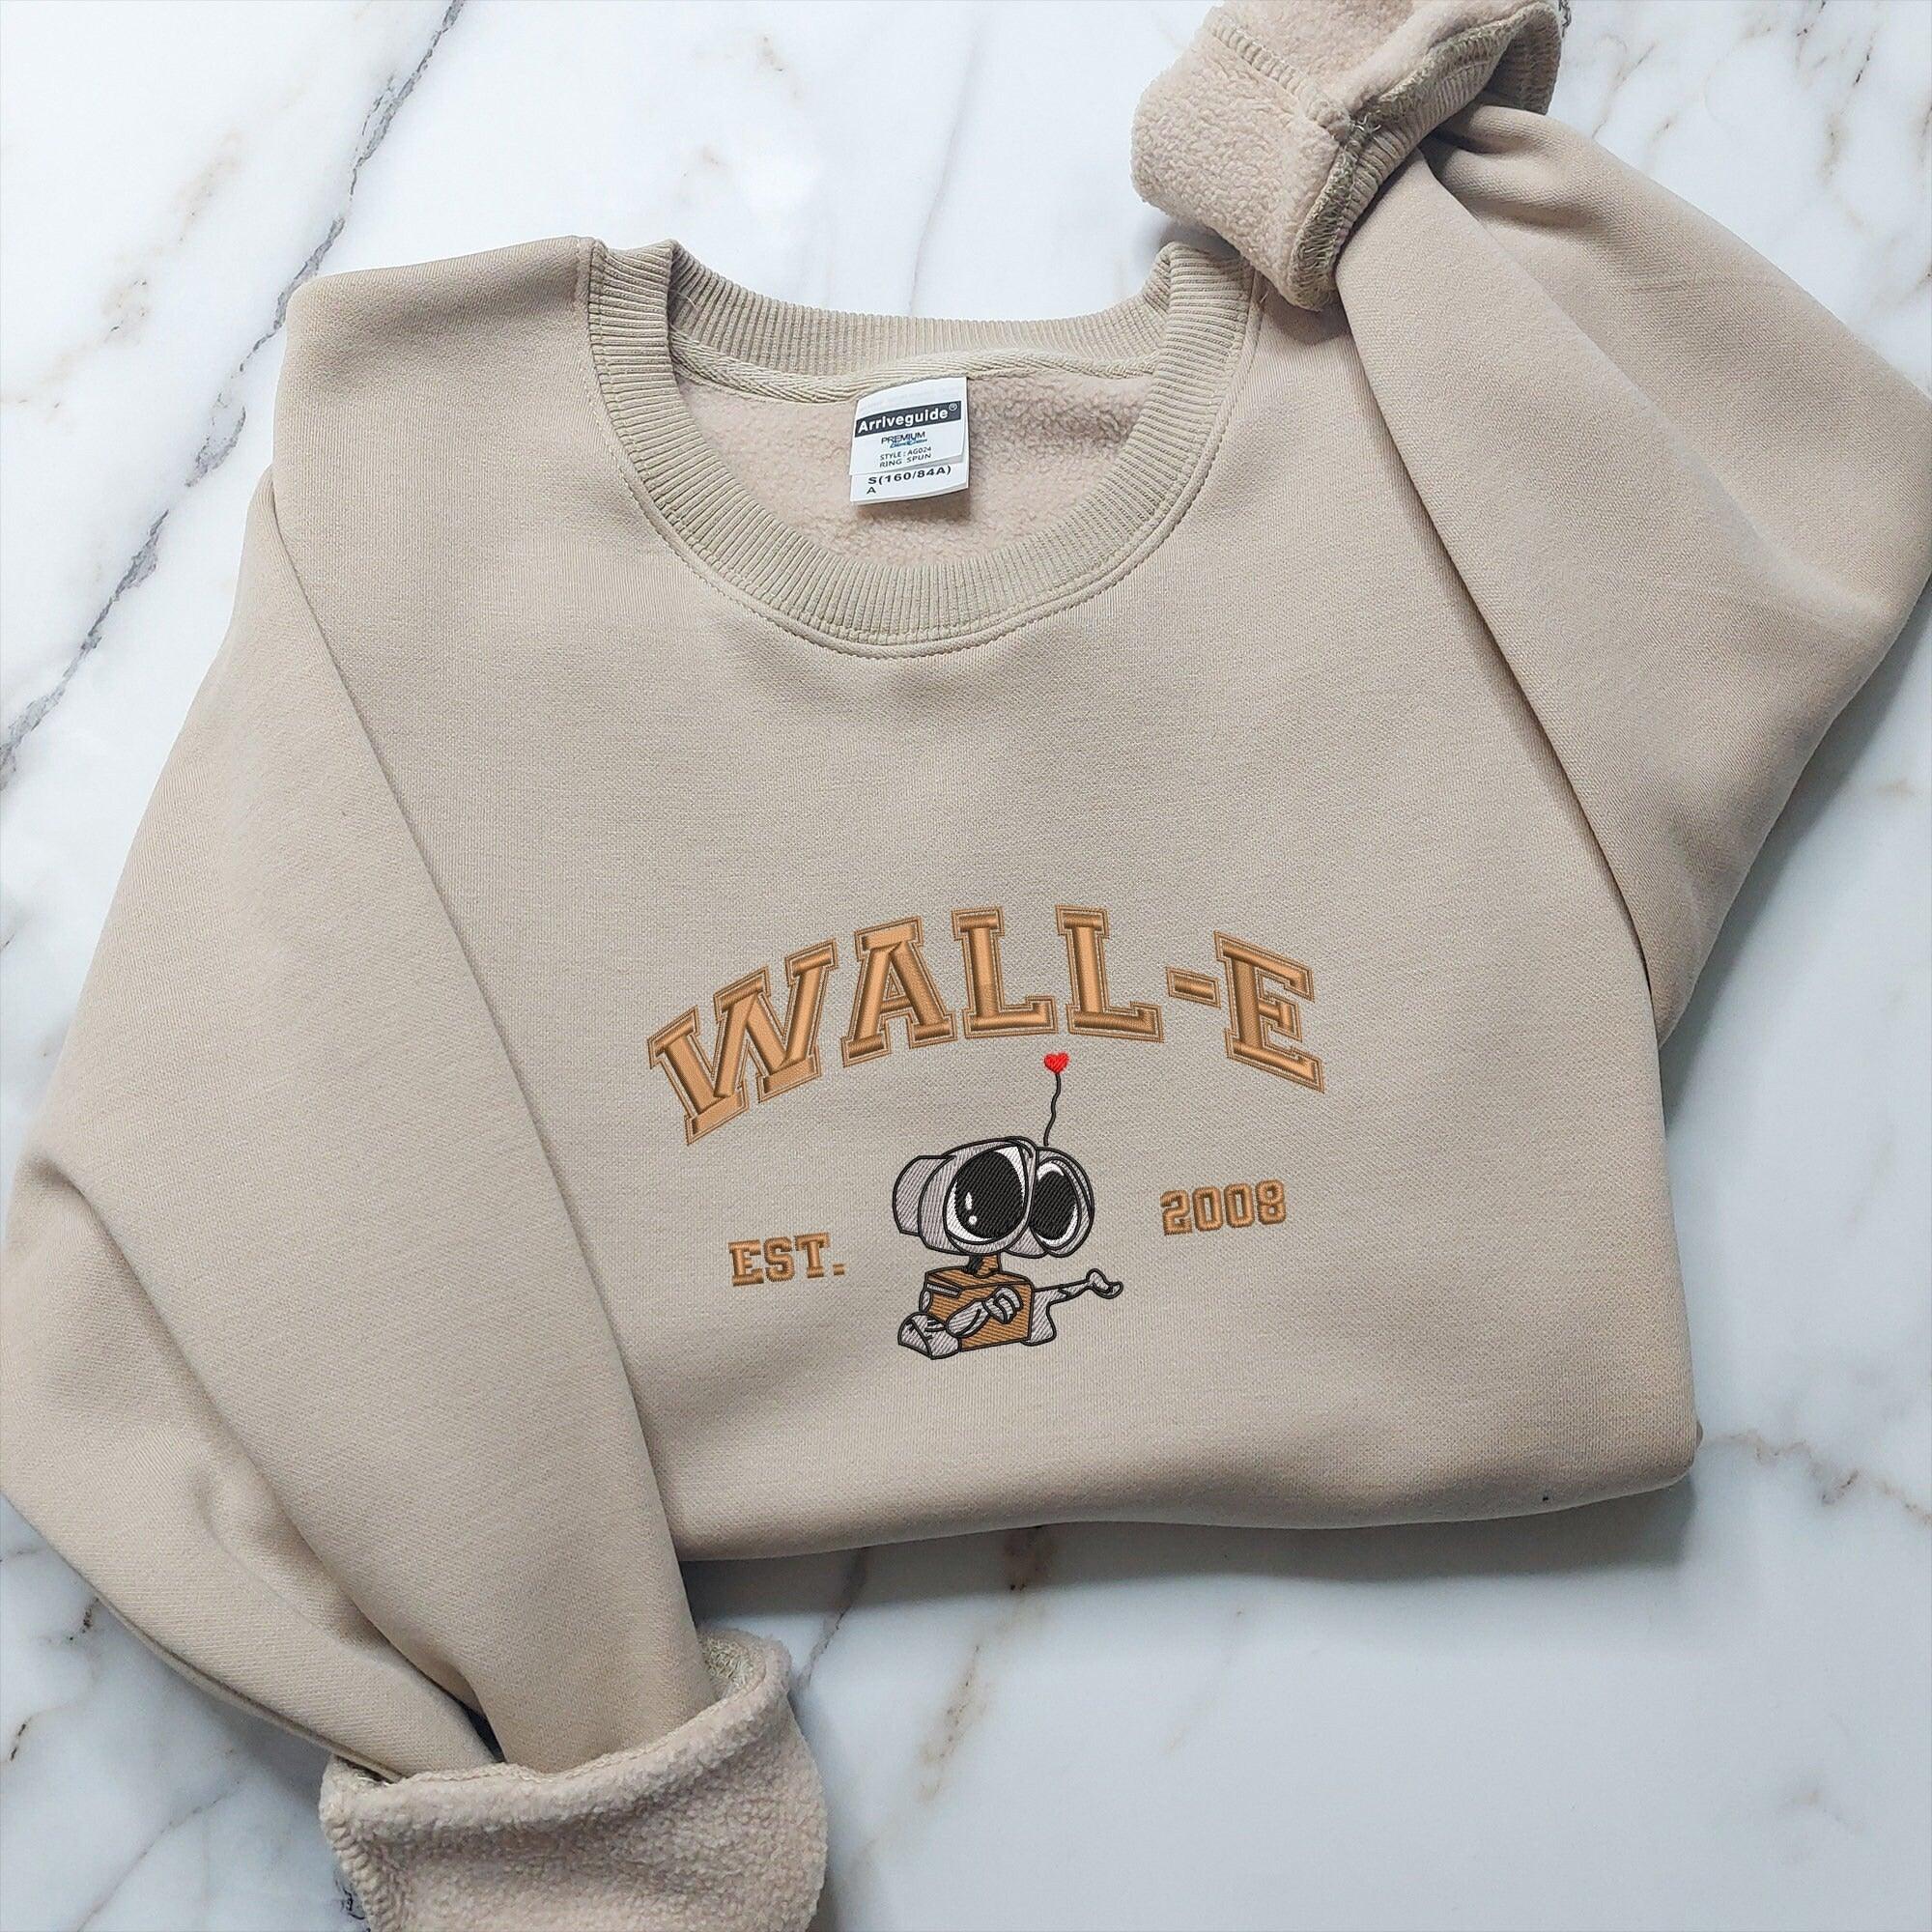 Custom Embroidered Sweatshirts For Couples, Custom Matching Couple Hoodies, Wall E and Eve Couples Vintage Y2K Embroidered Crewneck Sweatshirt